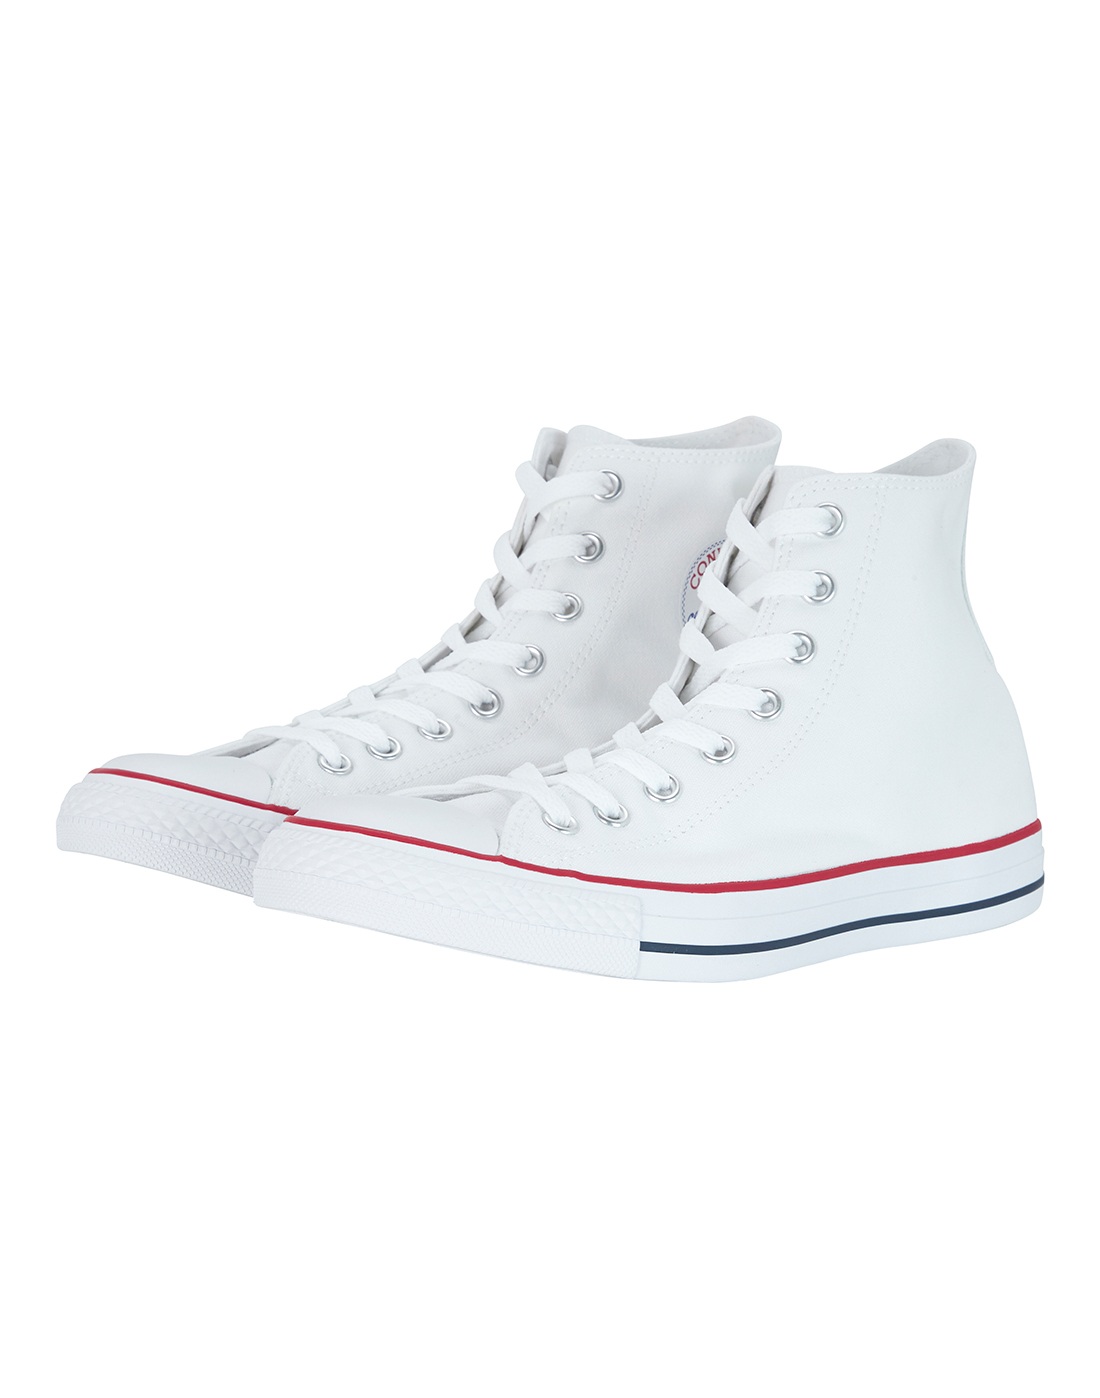 Converse Chuck Taylor Hi Top - White | Life Style Sports IE